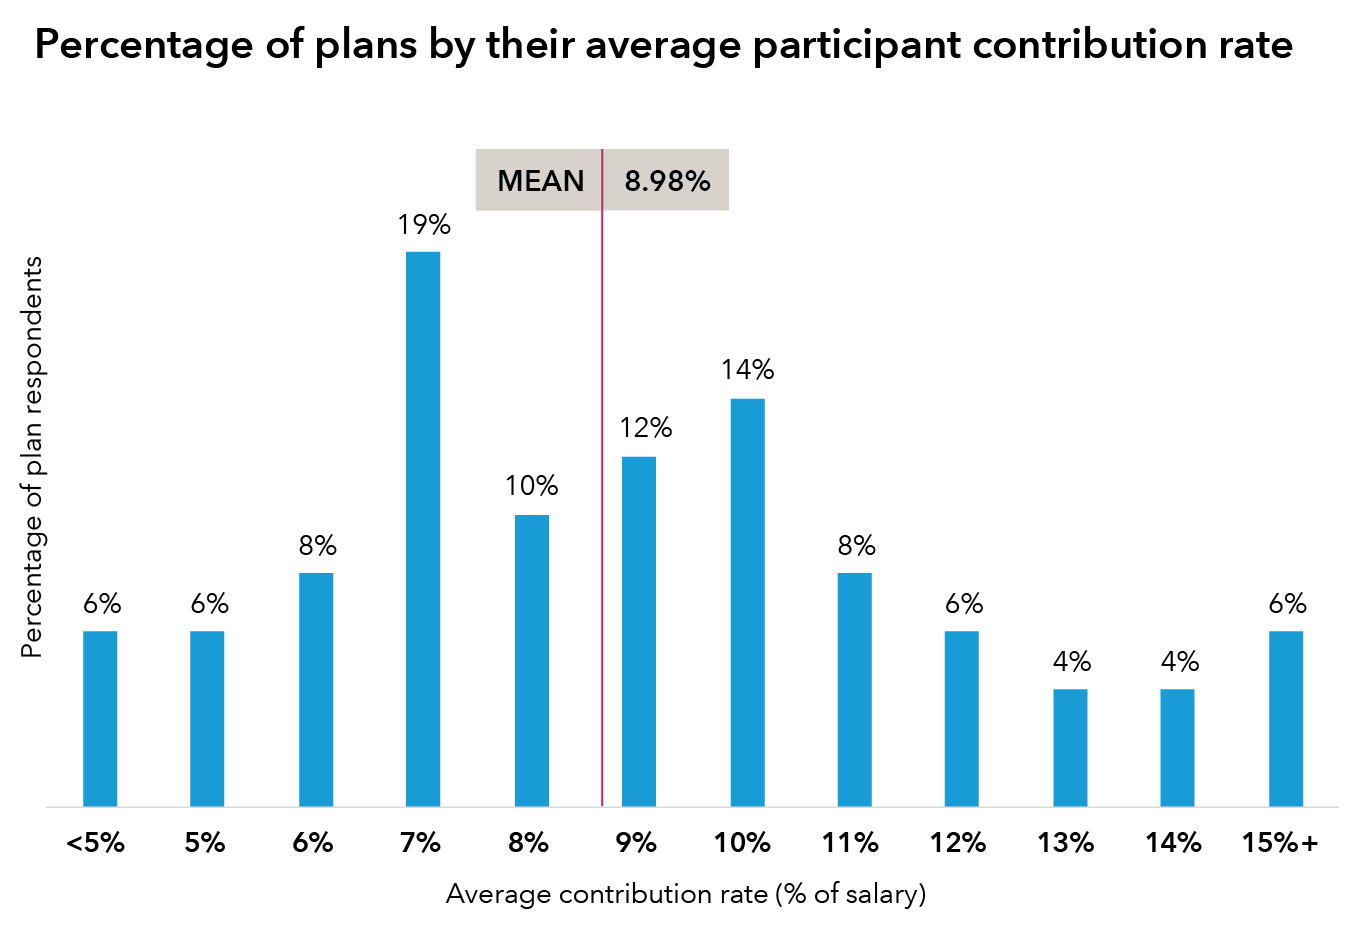 The chart displays the average percentages of salary that DC plan participants contribute to their plans, based on responses from surveyed plan sponsors. The mean contribution level based on all responses is 8.98% of salary. Six percent of plan sponsors say their participants contribute an average of less than 5% of their salary to their plans. The remaining results are: 6% of sponsors say participants contribute an average of 5%; 8% say participants contribute an average of 6%; 19% say participants contribute an average of 7%; 10% say participants contribute an average of 8%; 12% say participants contribute an average of 9%; 14% say participants contribute an average of 10%; 8% say participants contribute an average of 11%; 6% say participants contribute an average of 12%; 4% say participants contribute an average of 13%; 4% say participants contribute an average of 14%; and 6% say participants contribute an average of 15%-plus. 